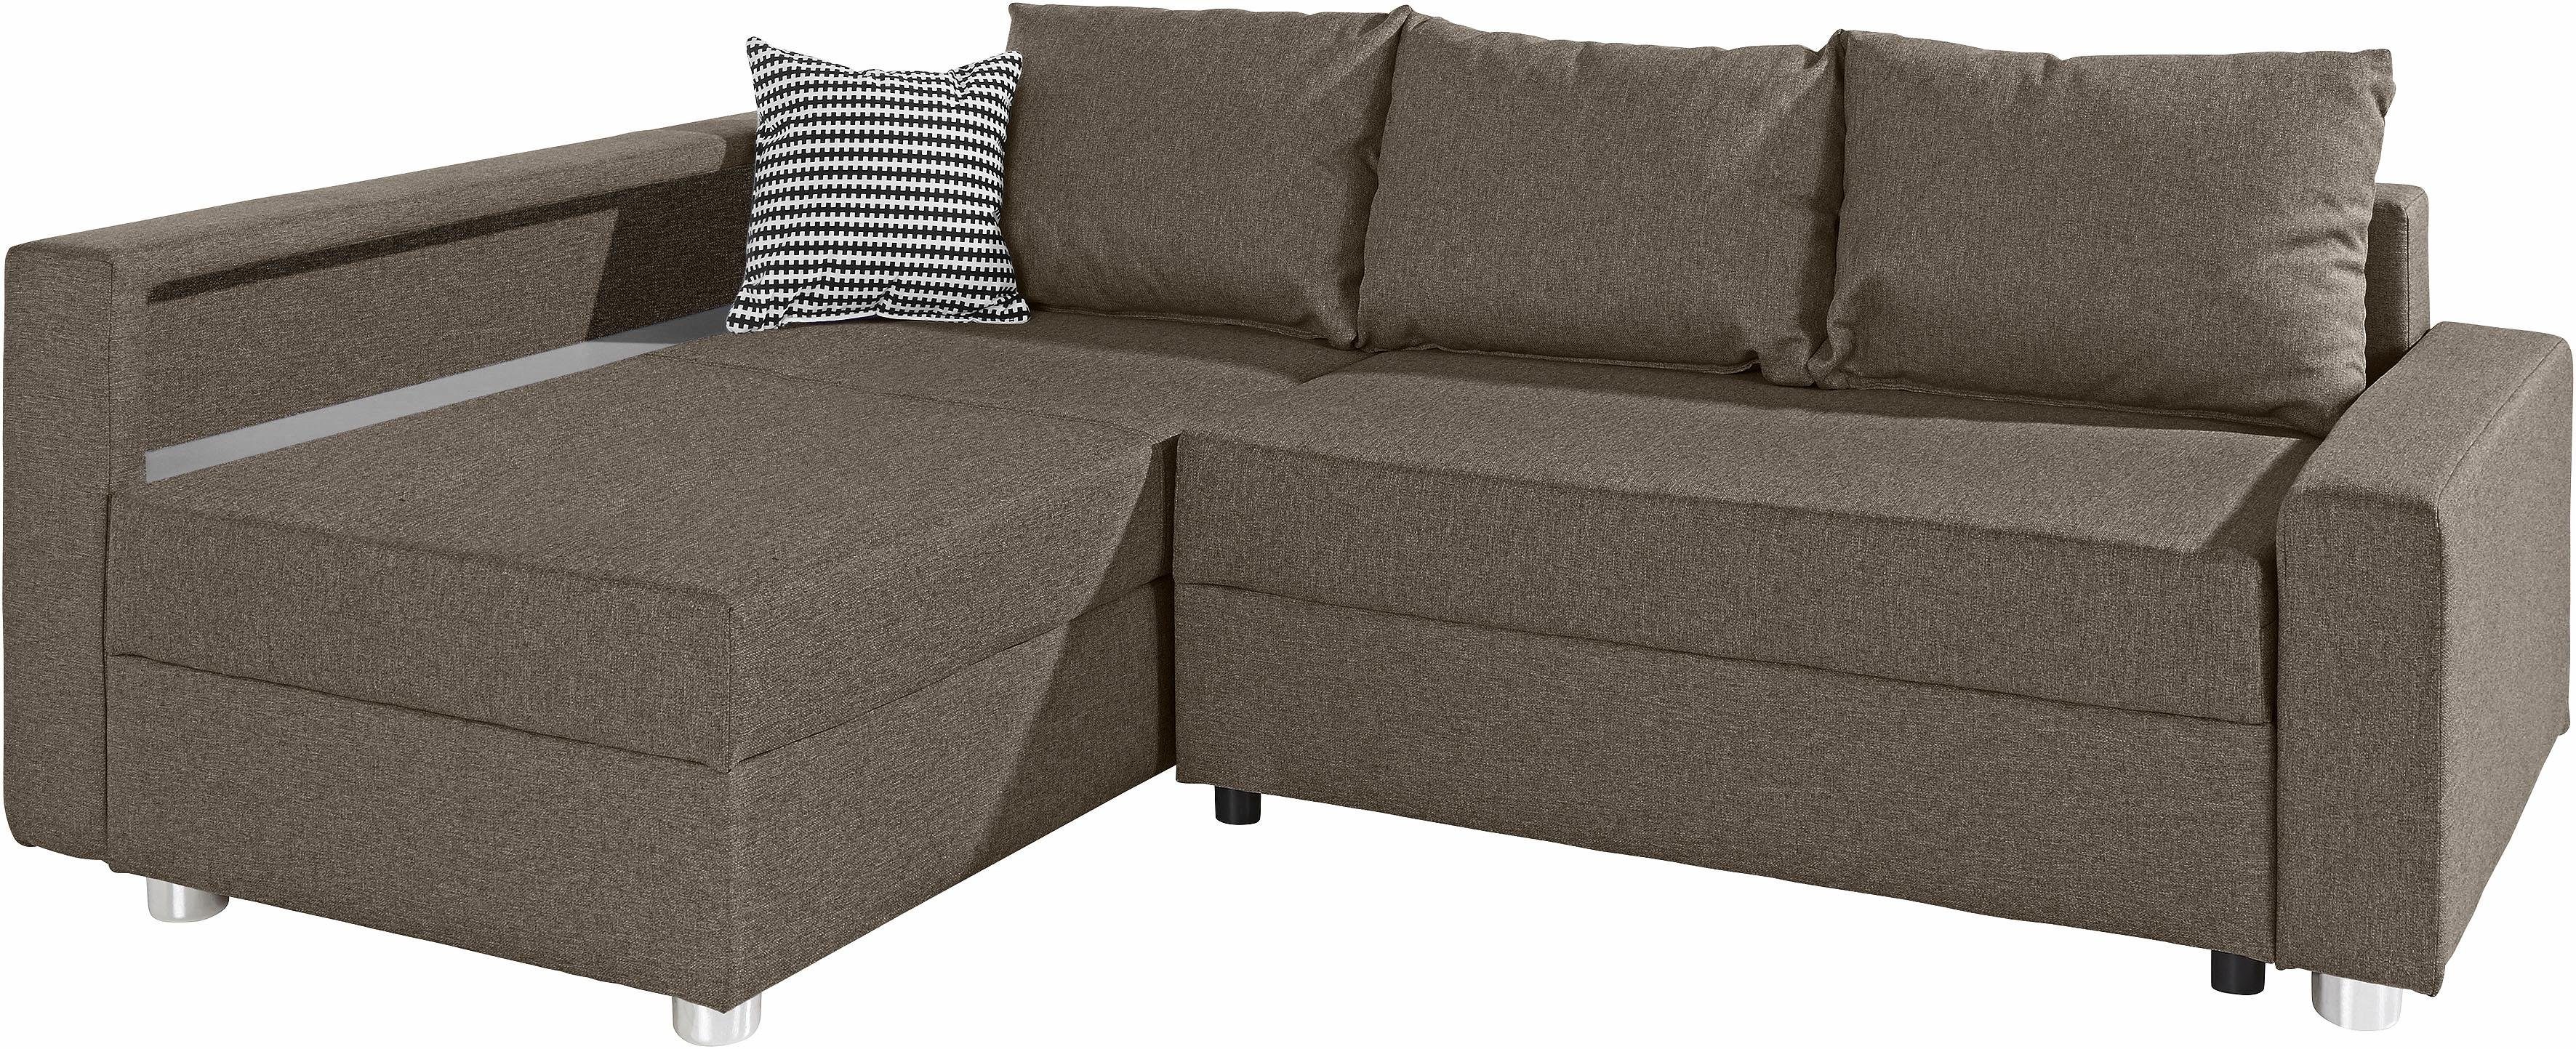 mit inklusive Federkern, wahlweise COLLECTION Ecksofa Relax, AB RGB-LED-Beleuchtung Bettfunktion,